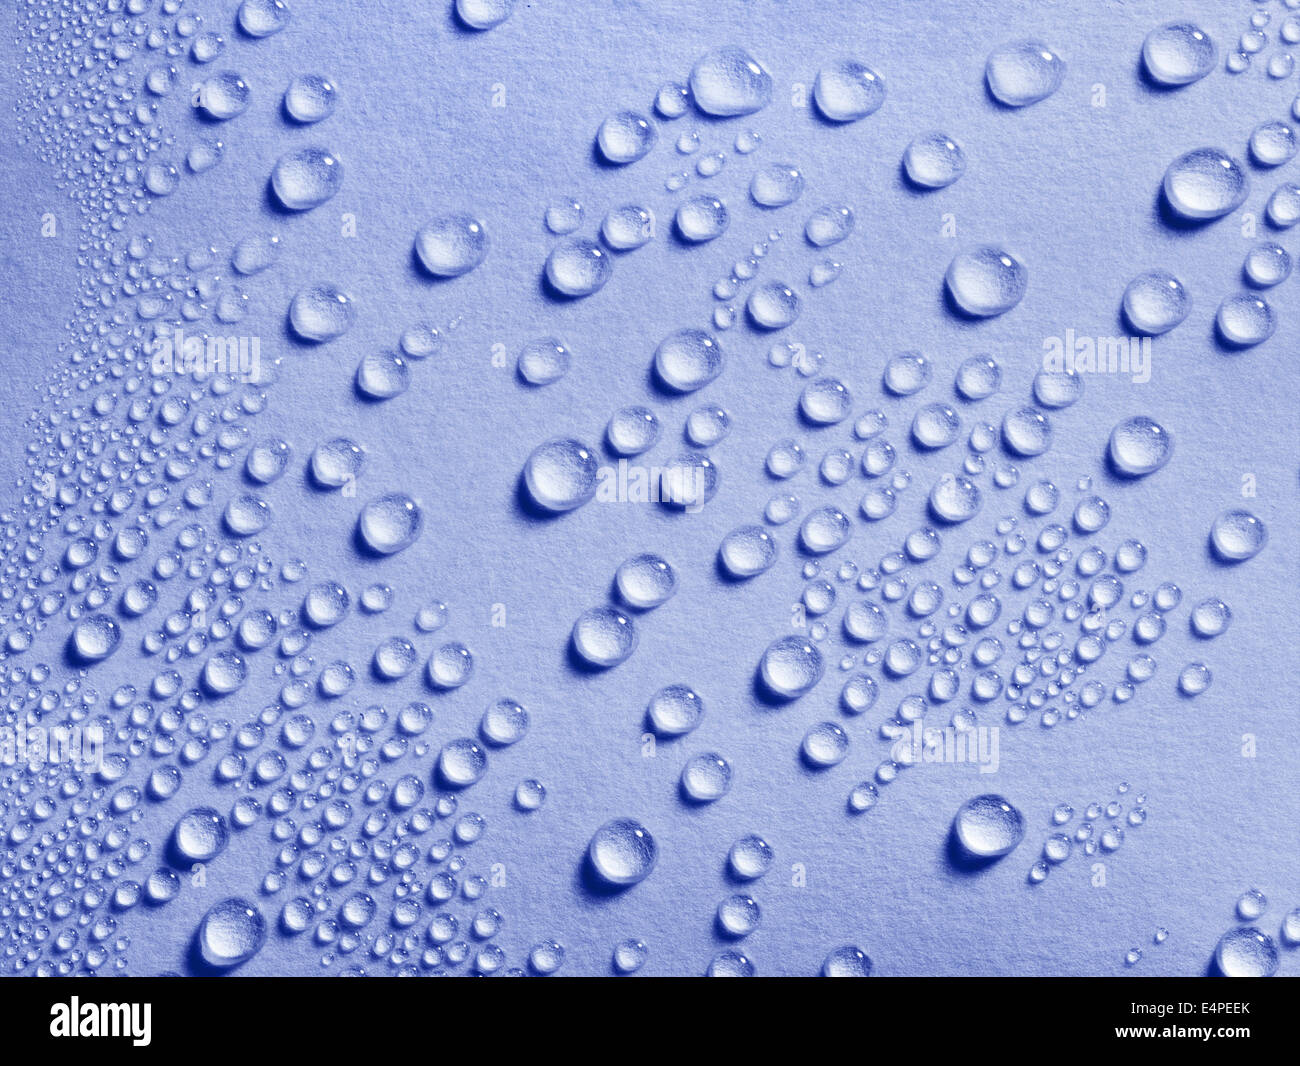 Water droplets on a blue surface Stock Photo